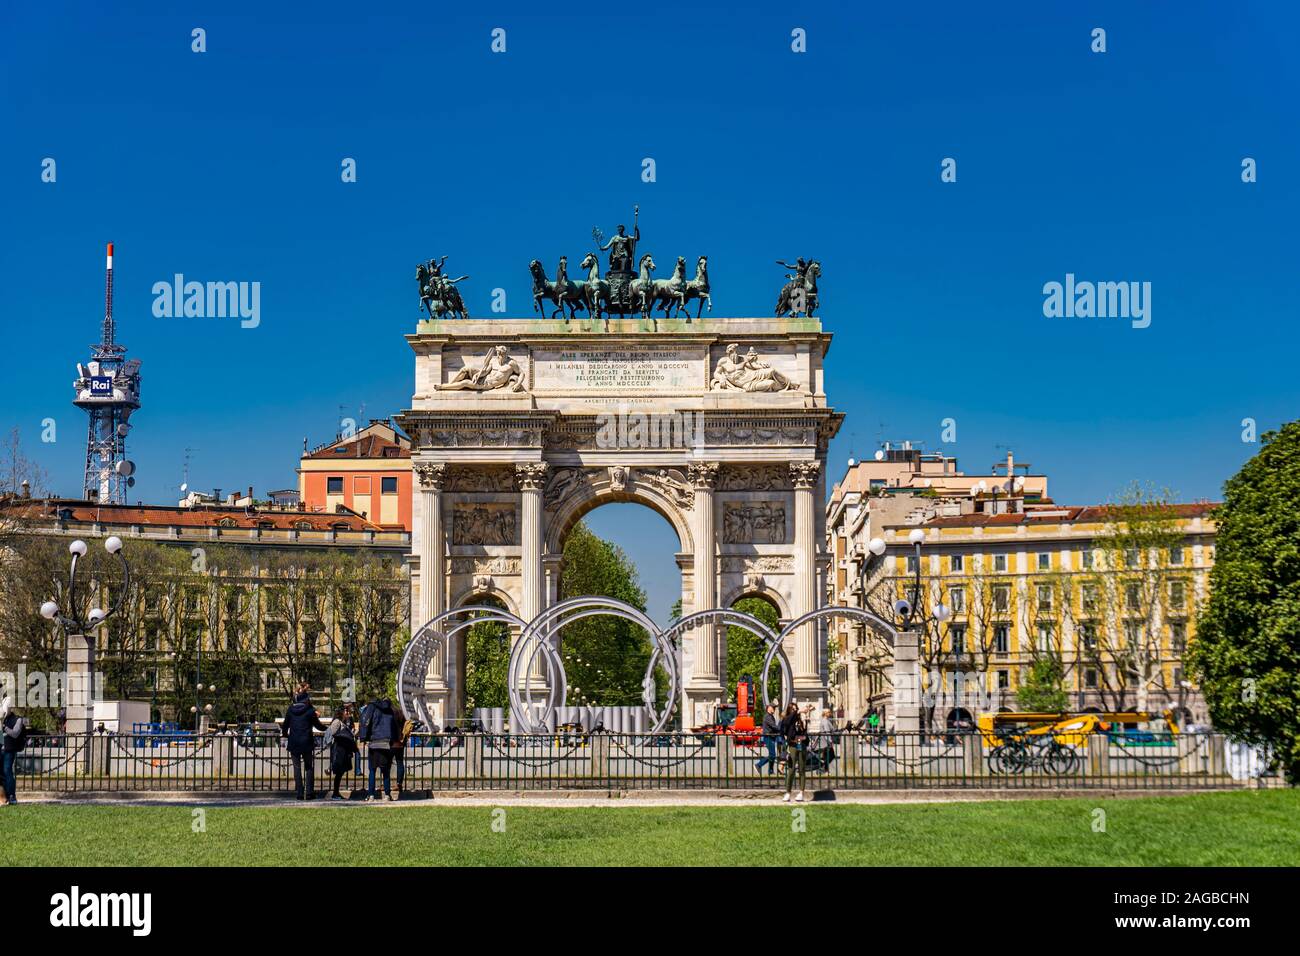 Unidentified people by Arch of Triumph (Arco della Pace) at Park Sempione in Milan, Italy. Stock Photo